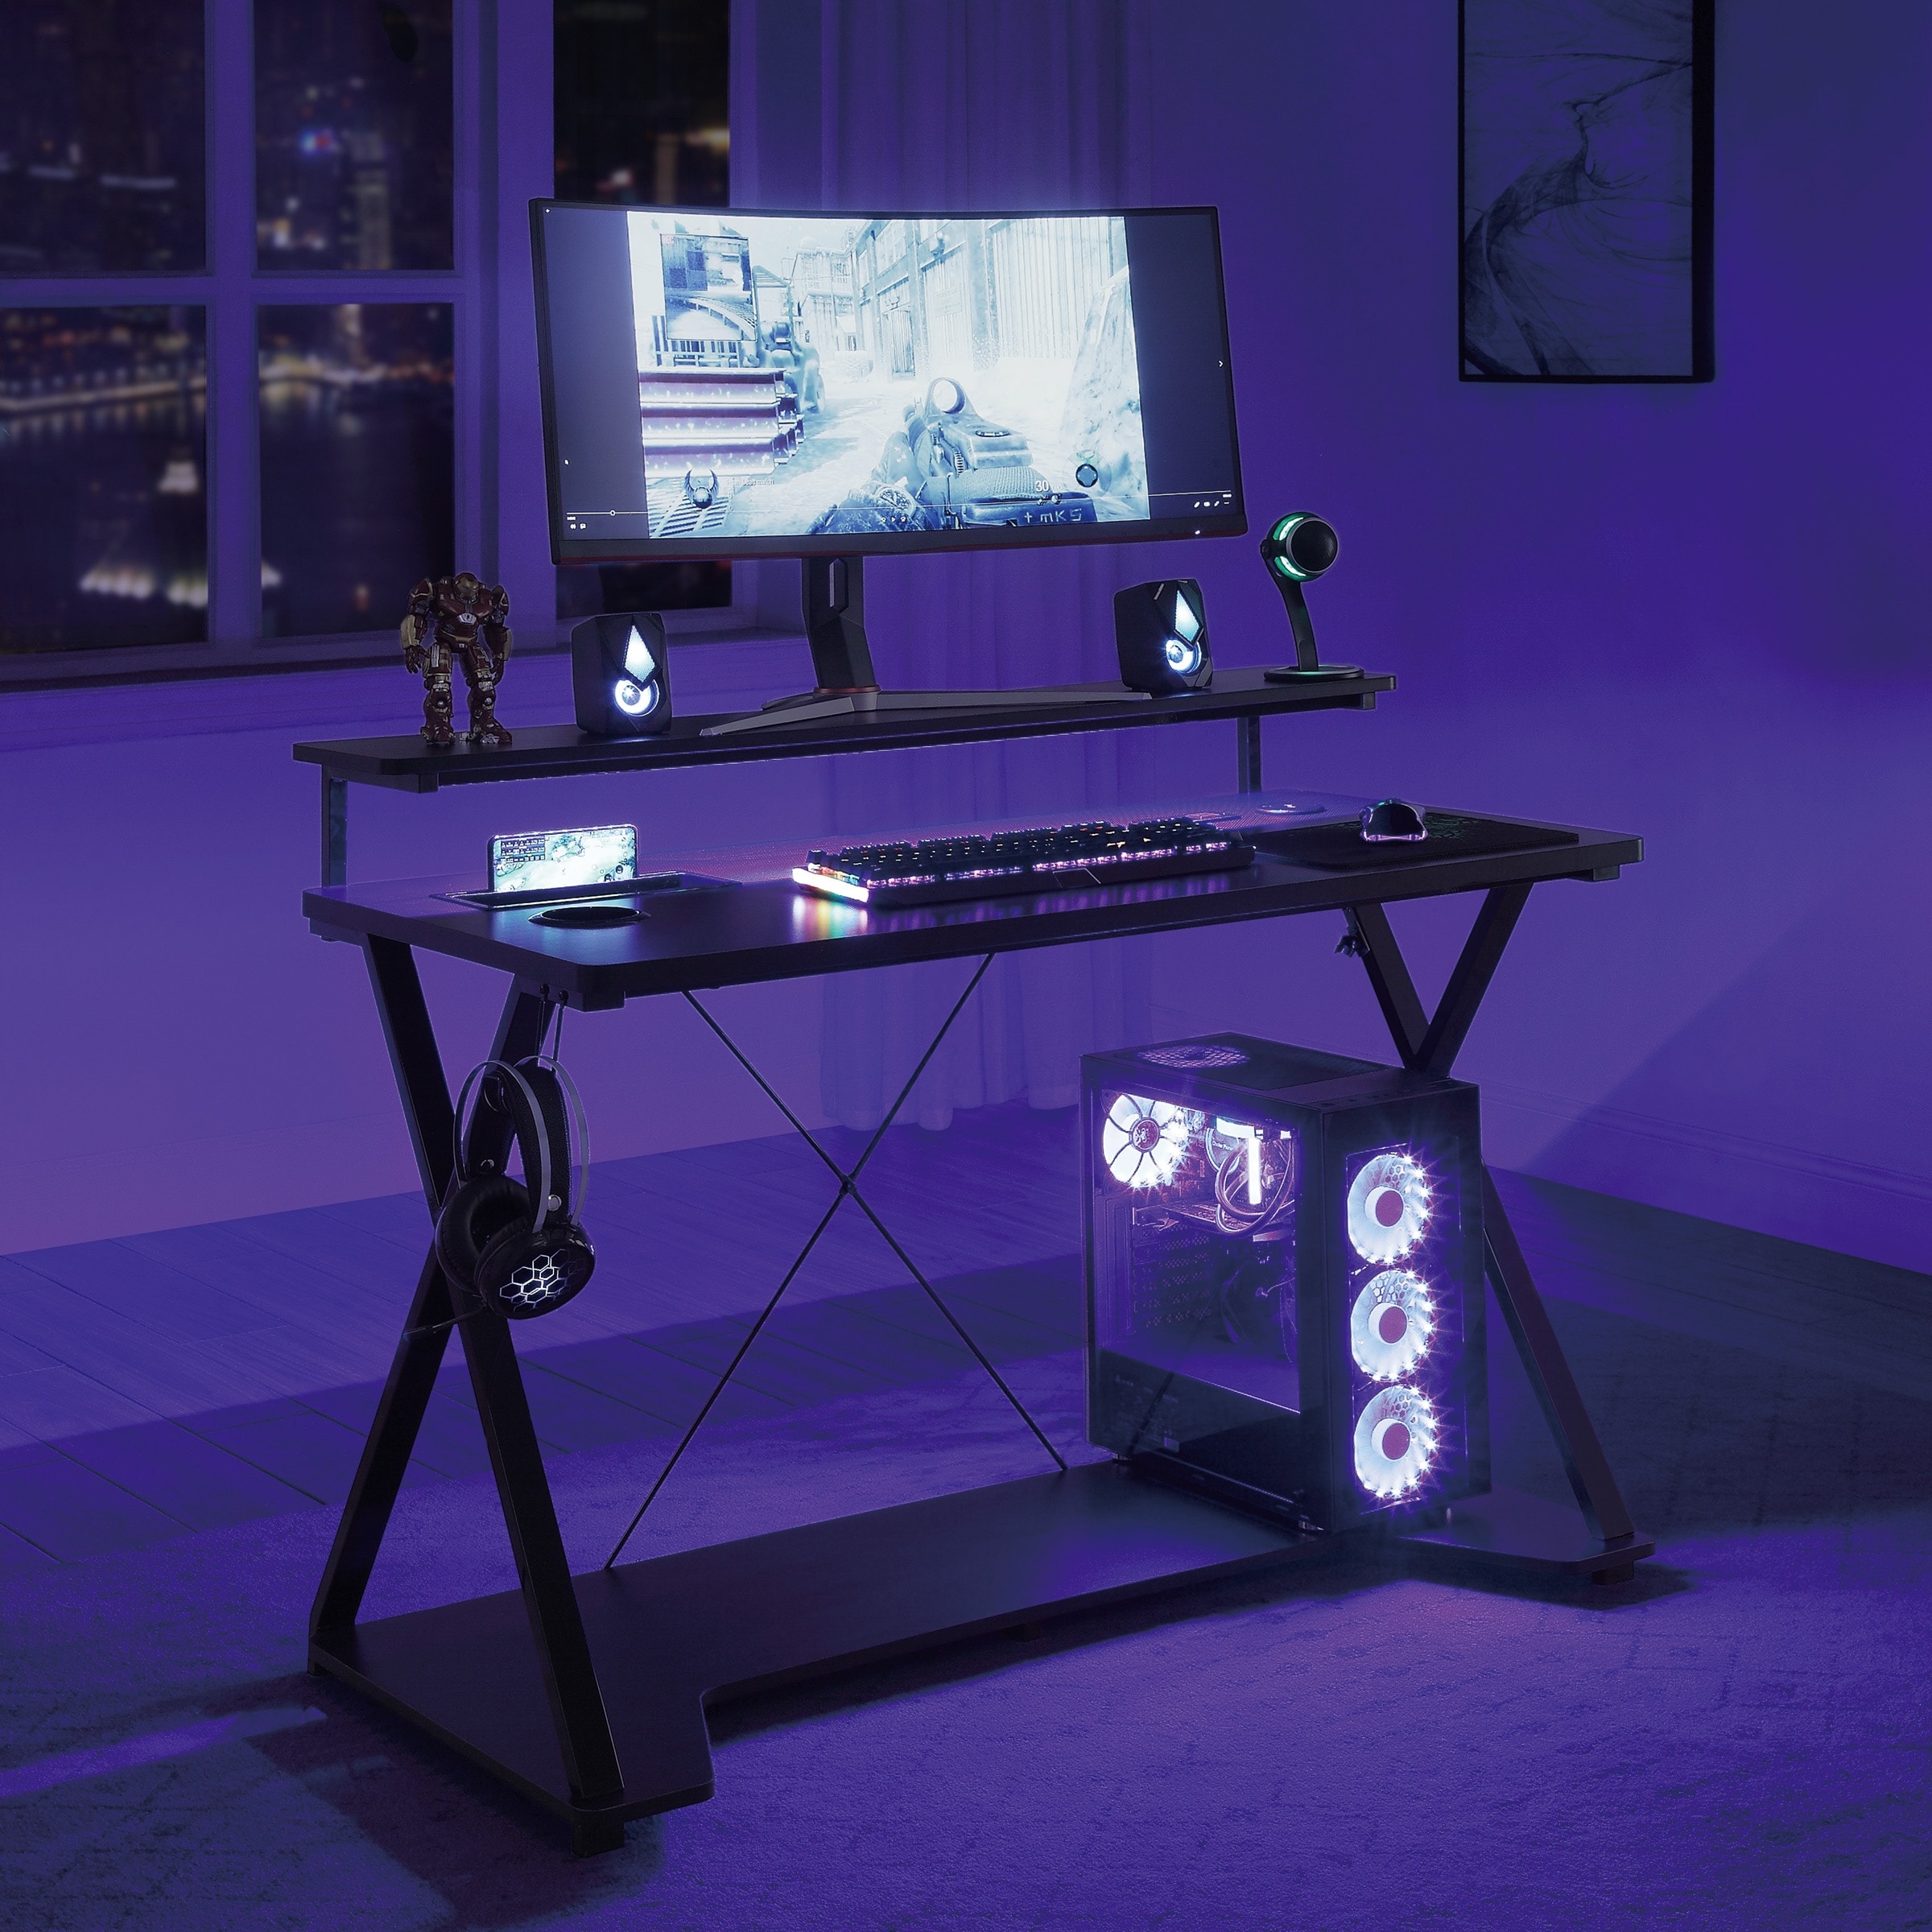 https://ak1.ostkcdn.com/images/products/is/images/direct/a73a5d8a14993f5212ac27229ffb2bfe7677c19a/Checkpoint-Ghost-Battlestation-Gaming-Desk-with-RGB-LED-Lights.jpg